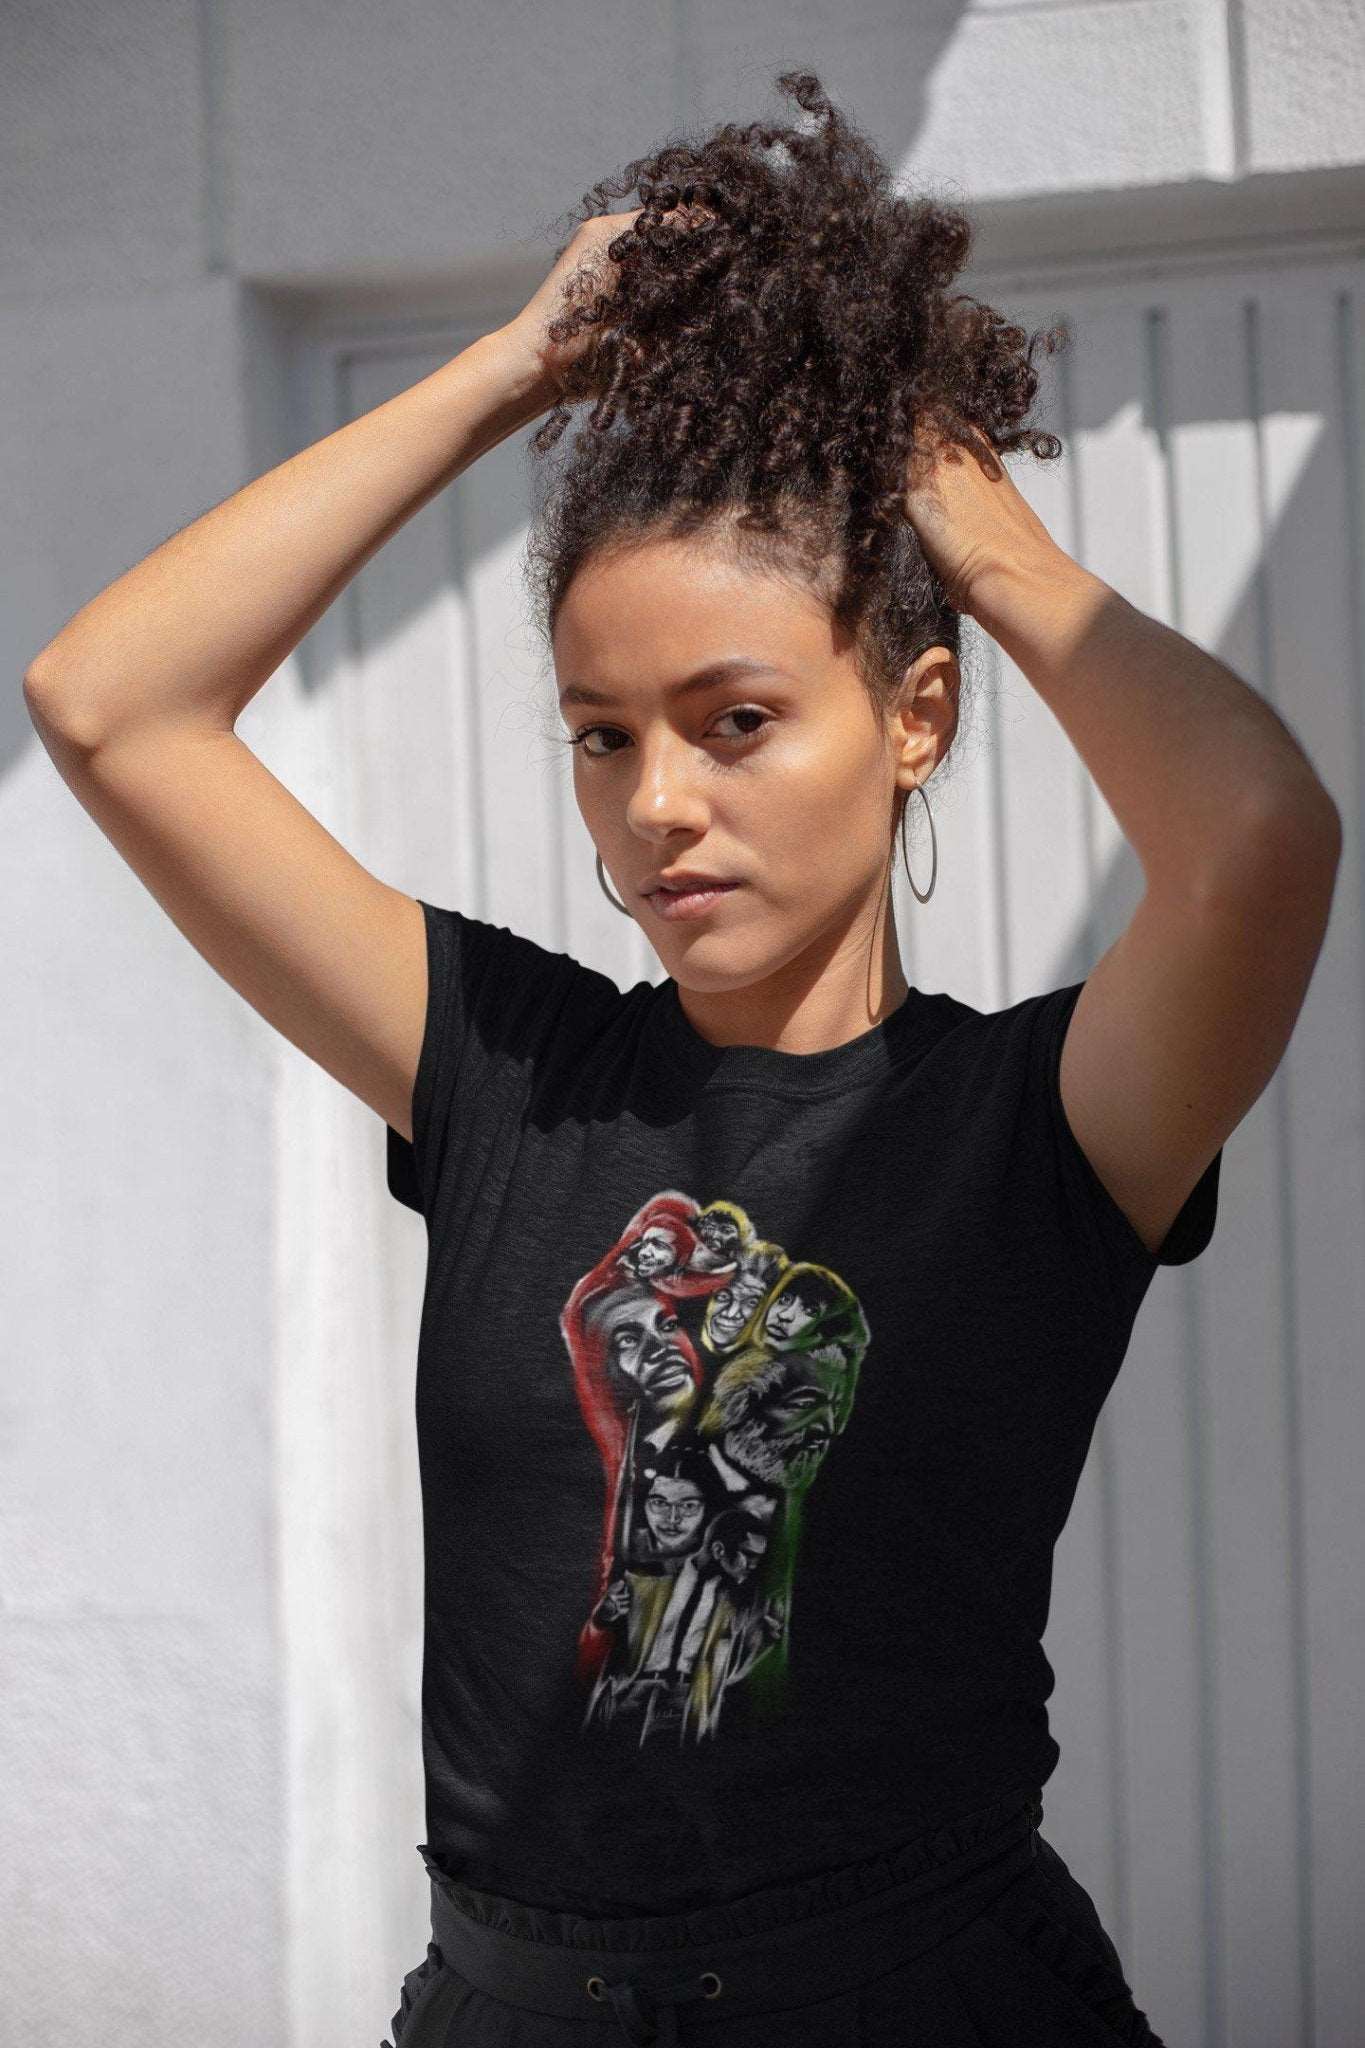 Knowledge is Power T-Shirt | Knowledge Fist | Ladies' Black Crew Neck T-Shirt - Androo's Art